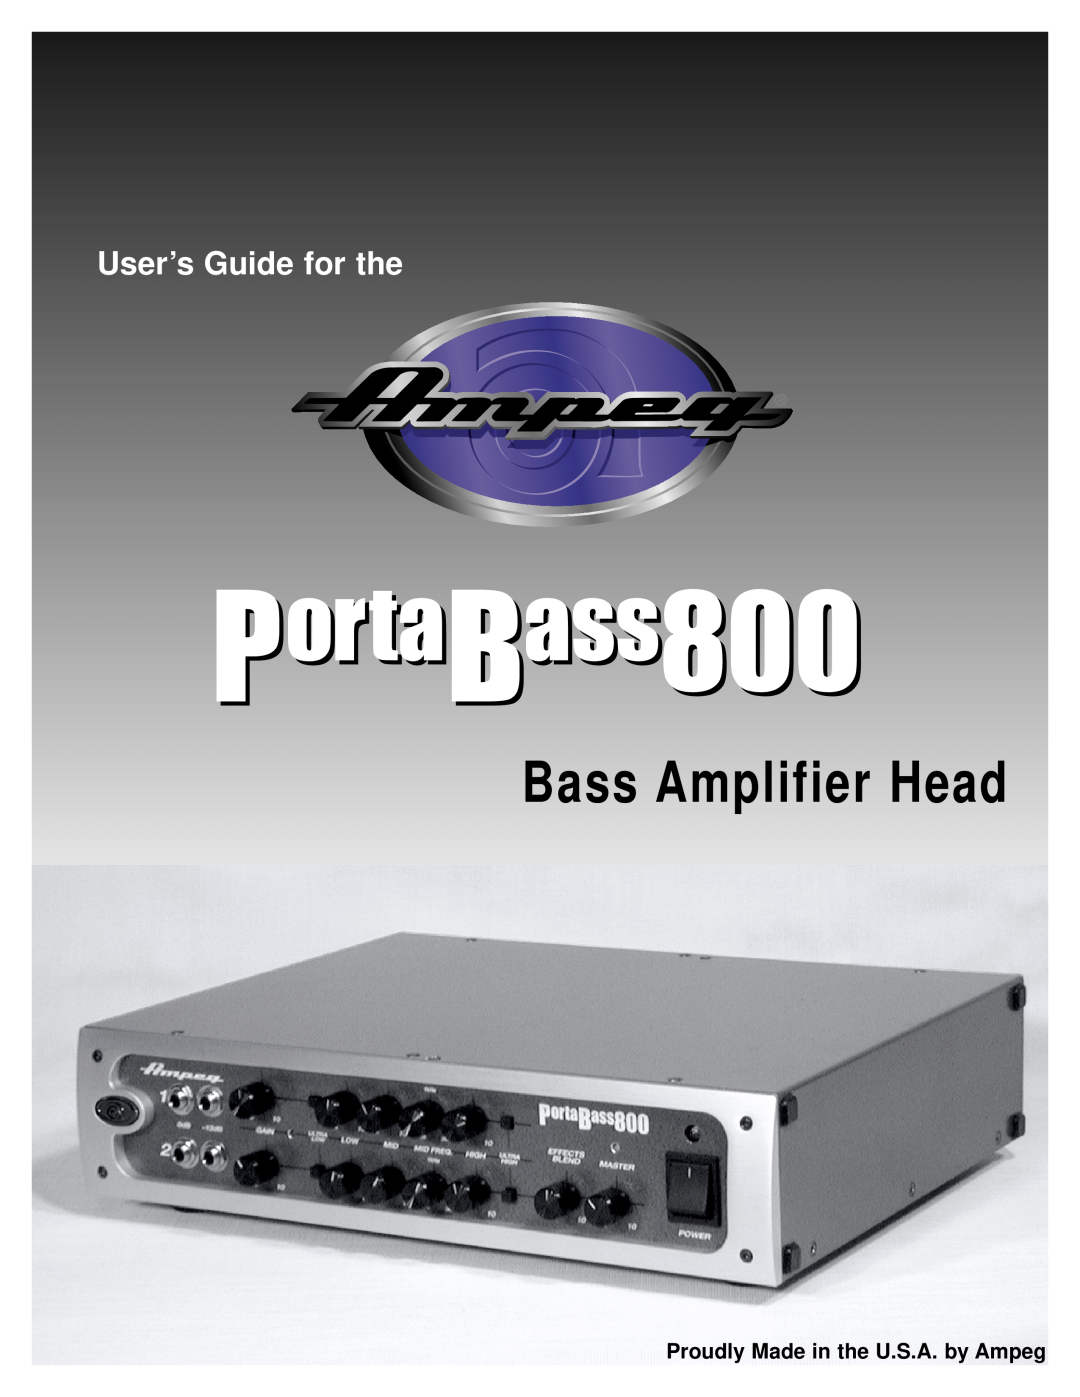 Ampeg PortaBass800 manual Proudly Made in the U.S.A. by Ampeg, Bass Amplifier Head, User’s Guide for the 